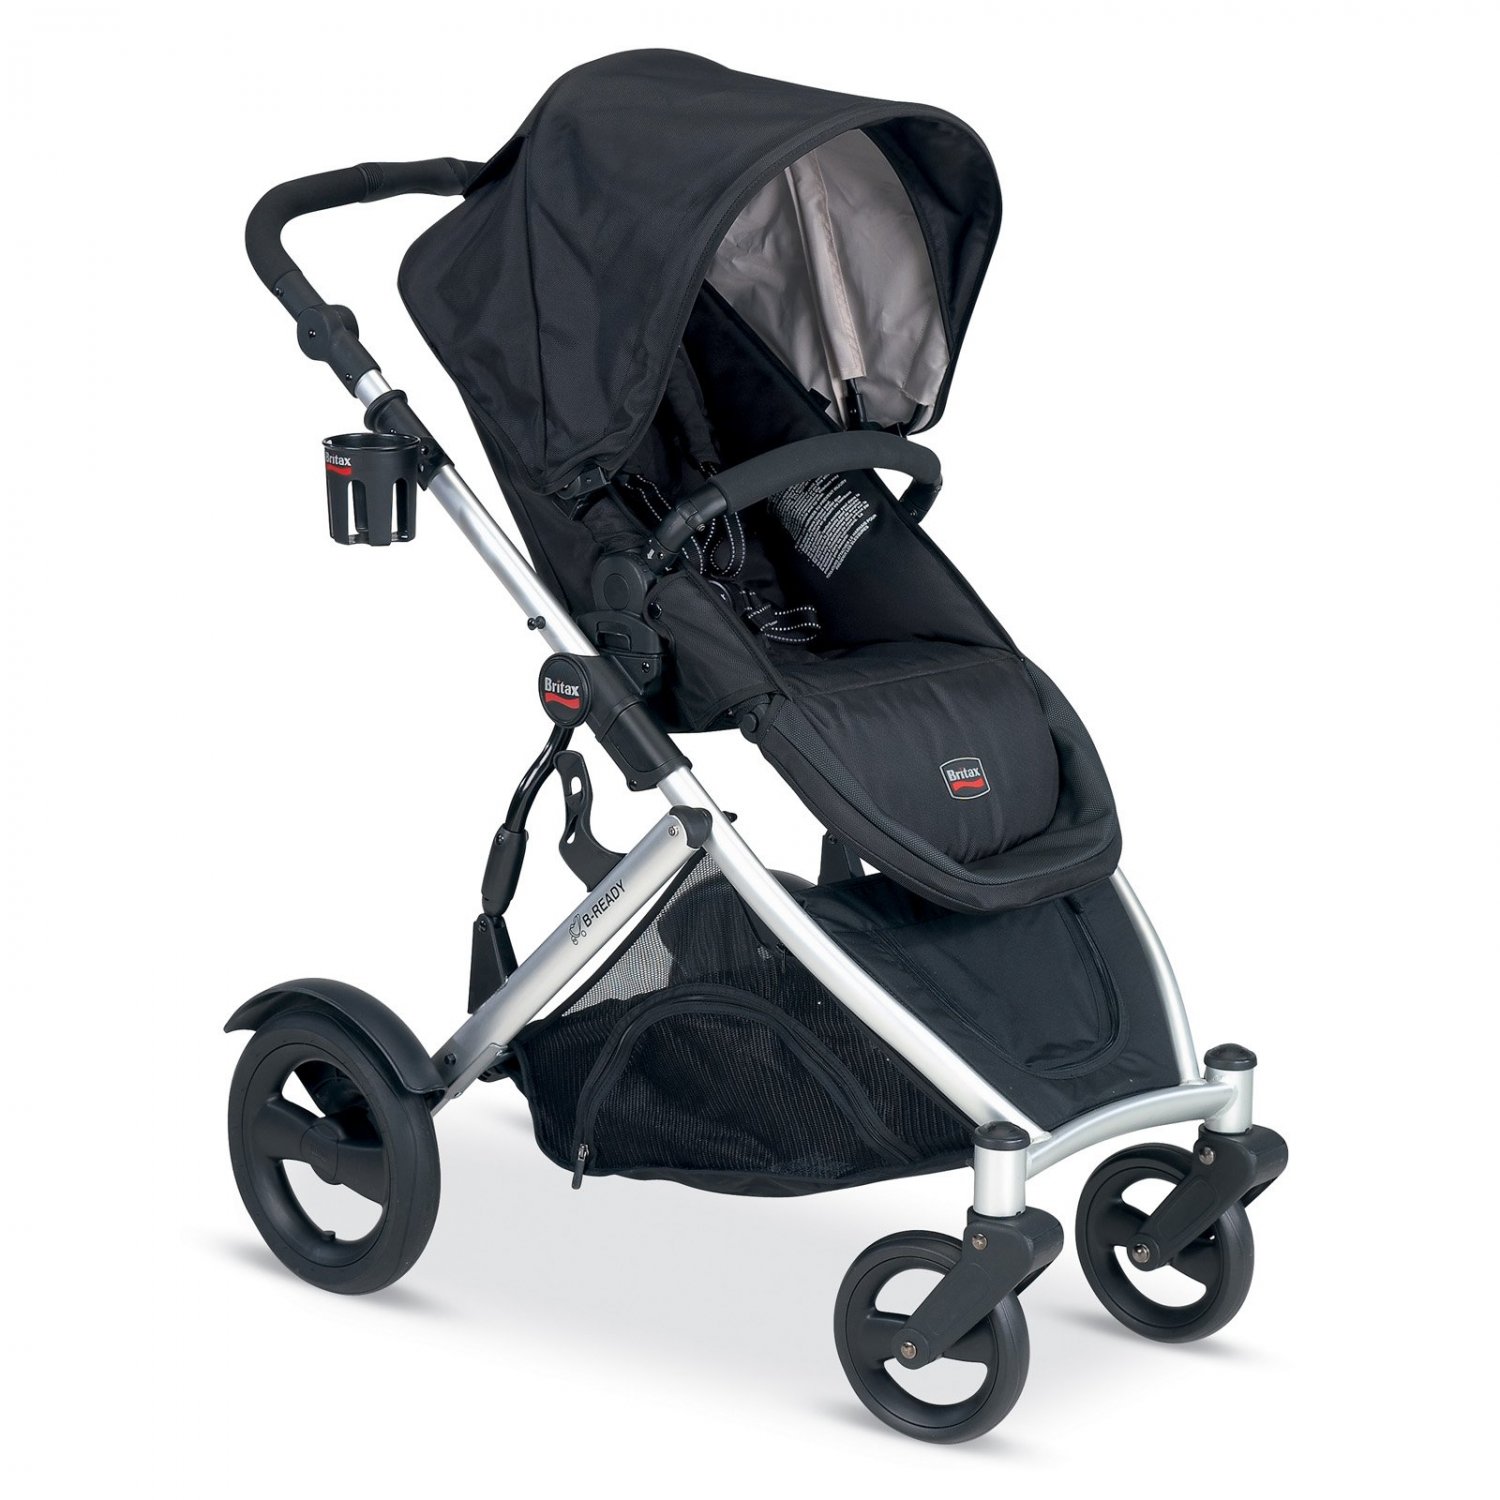 britax chaperone stroller review